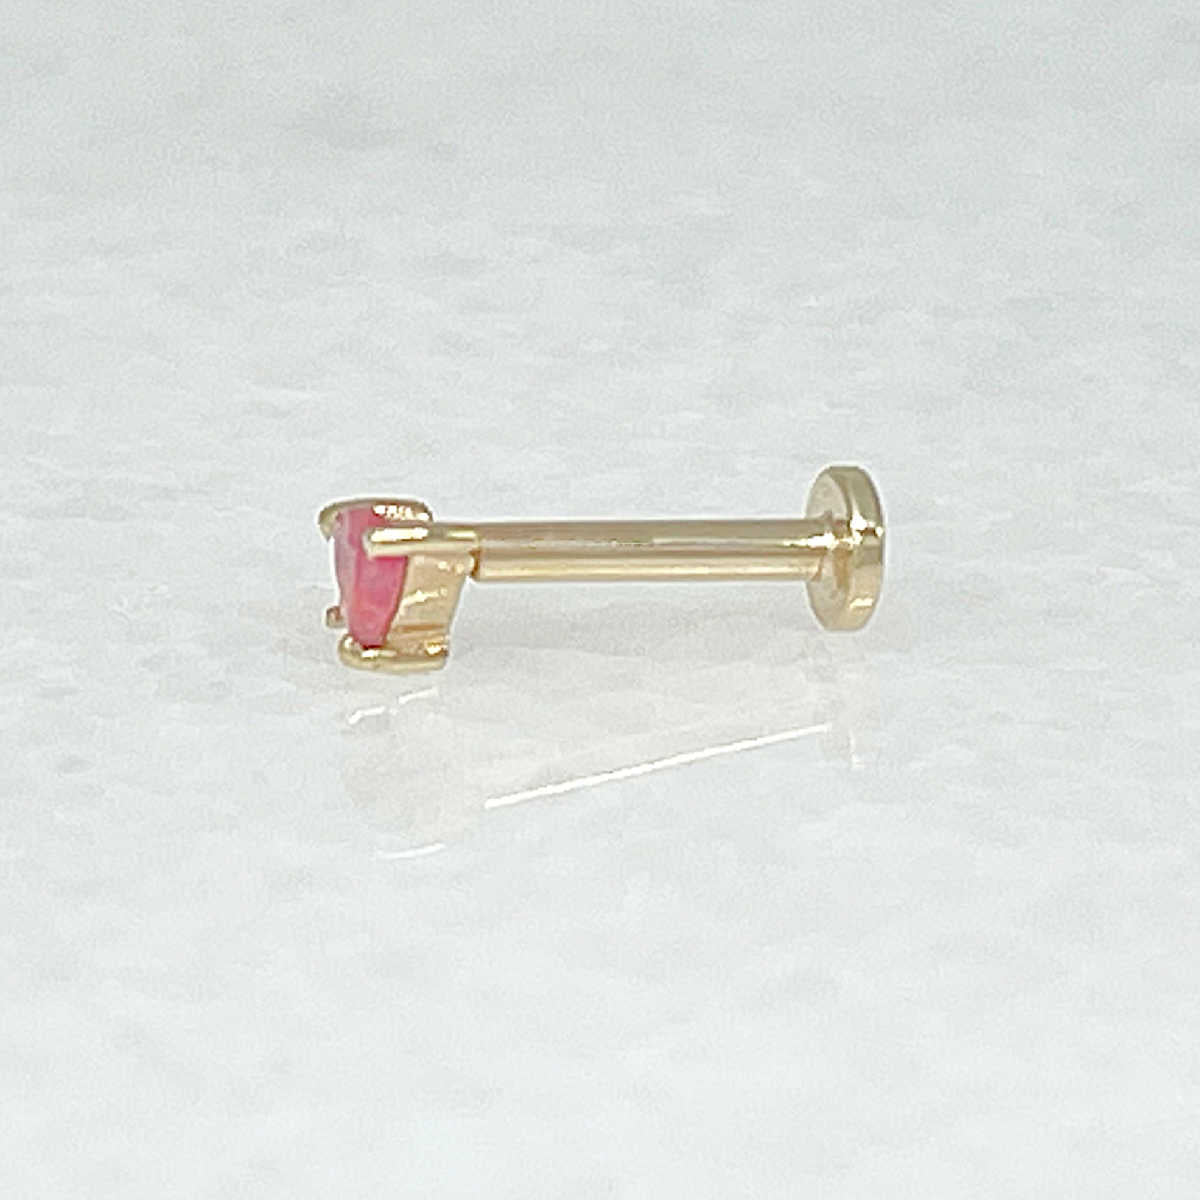 20G/18G/16G Rose Gold Threadless Push Pin Labret Stud Solid 925 Sterling  Silver Tragus Stud Flat Back Earring Helix Conch - Etsy